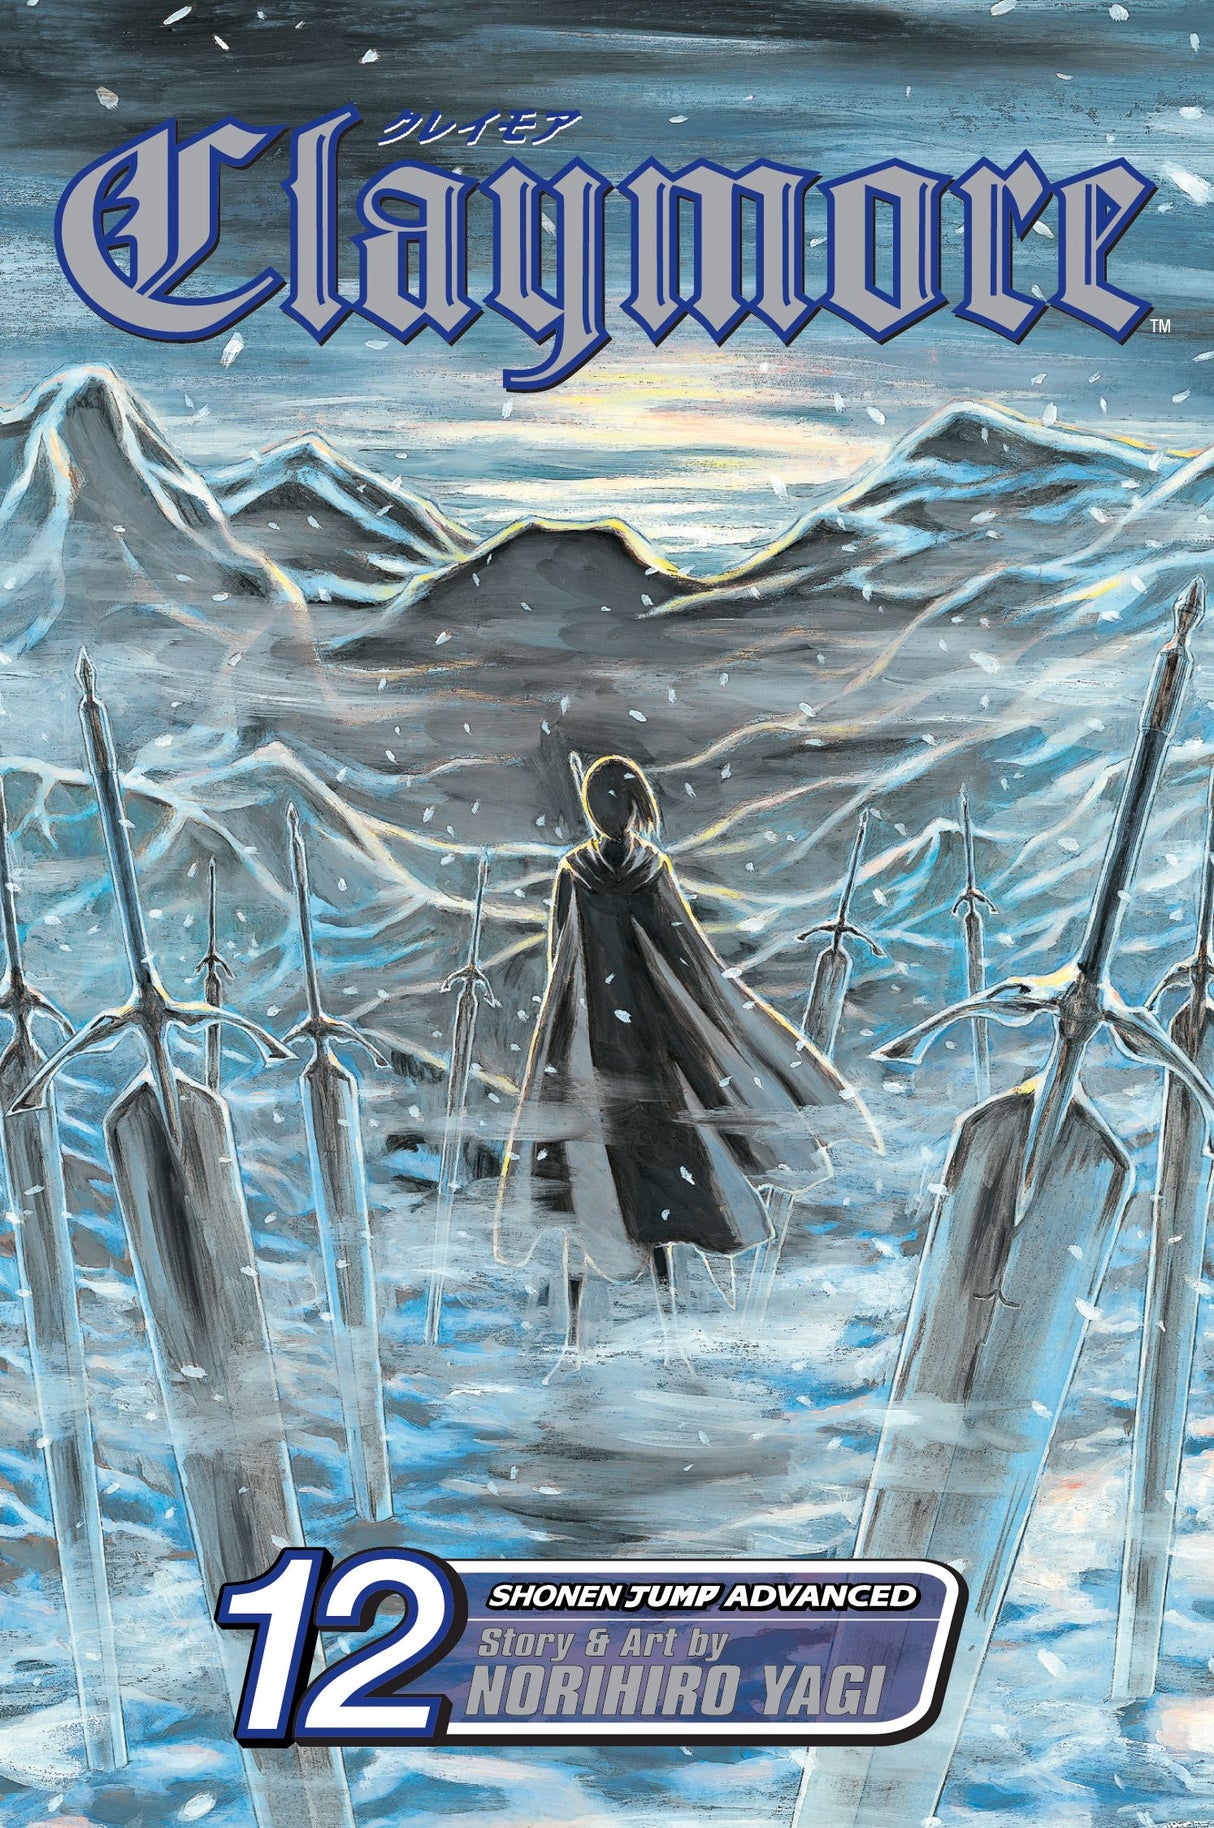 Cover image of the Manga Claymore-Vol-12